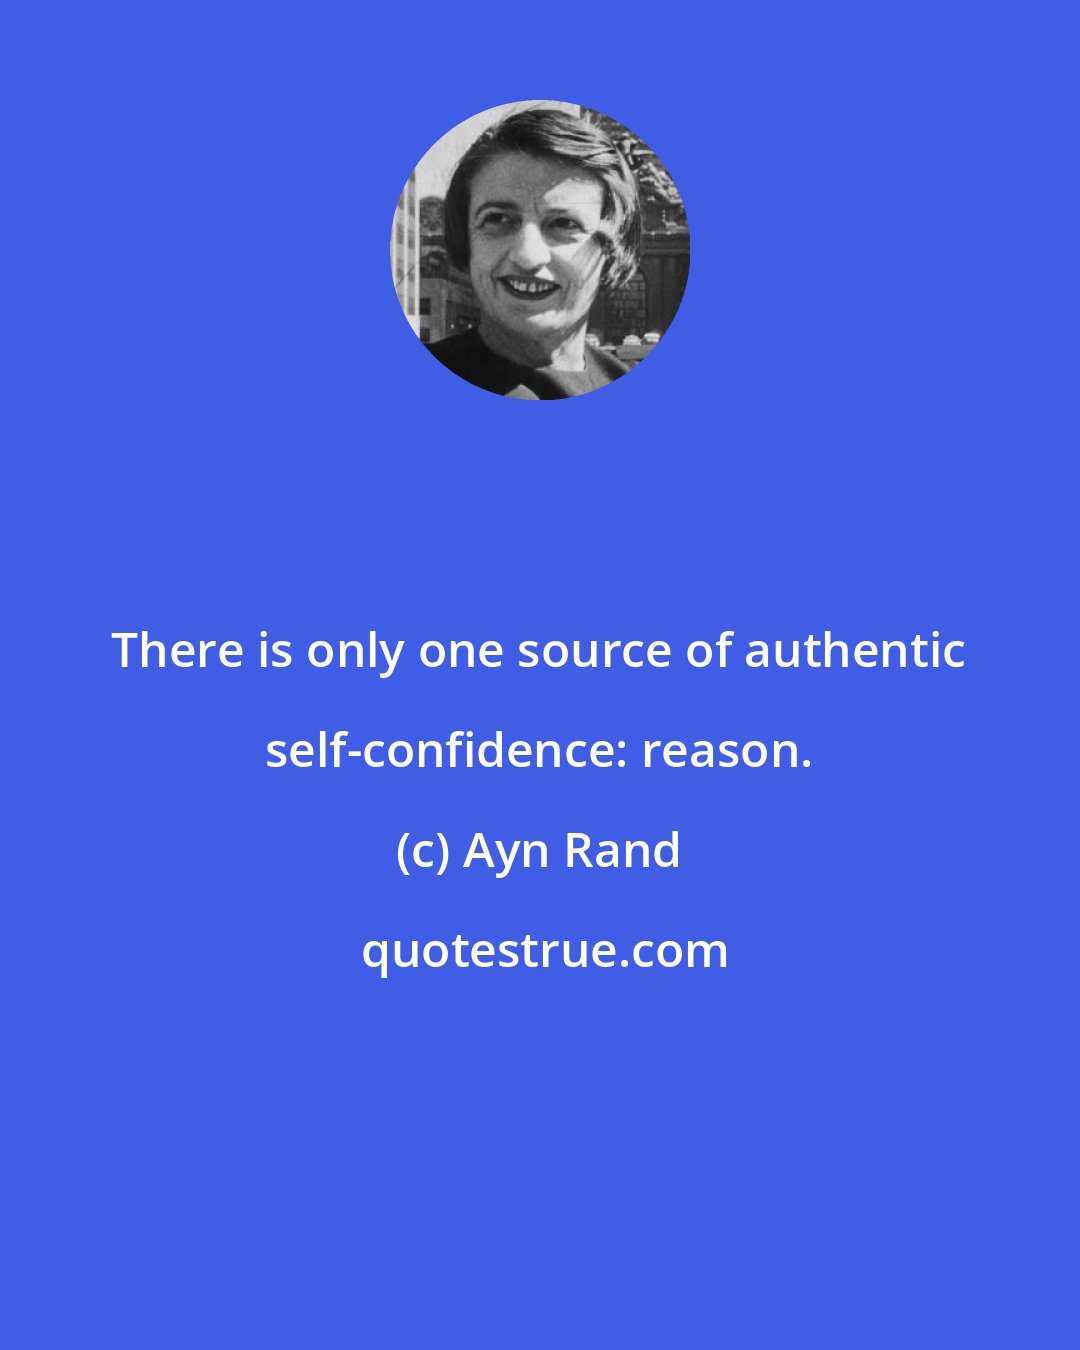 Ayn Rand: There is only one source of authentic self-confidence: reason.